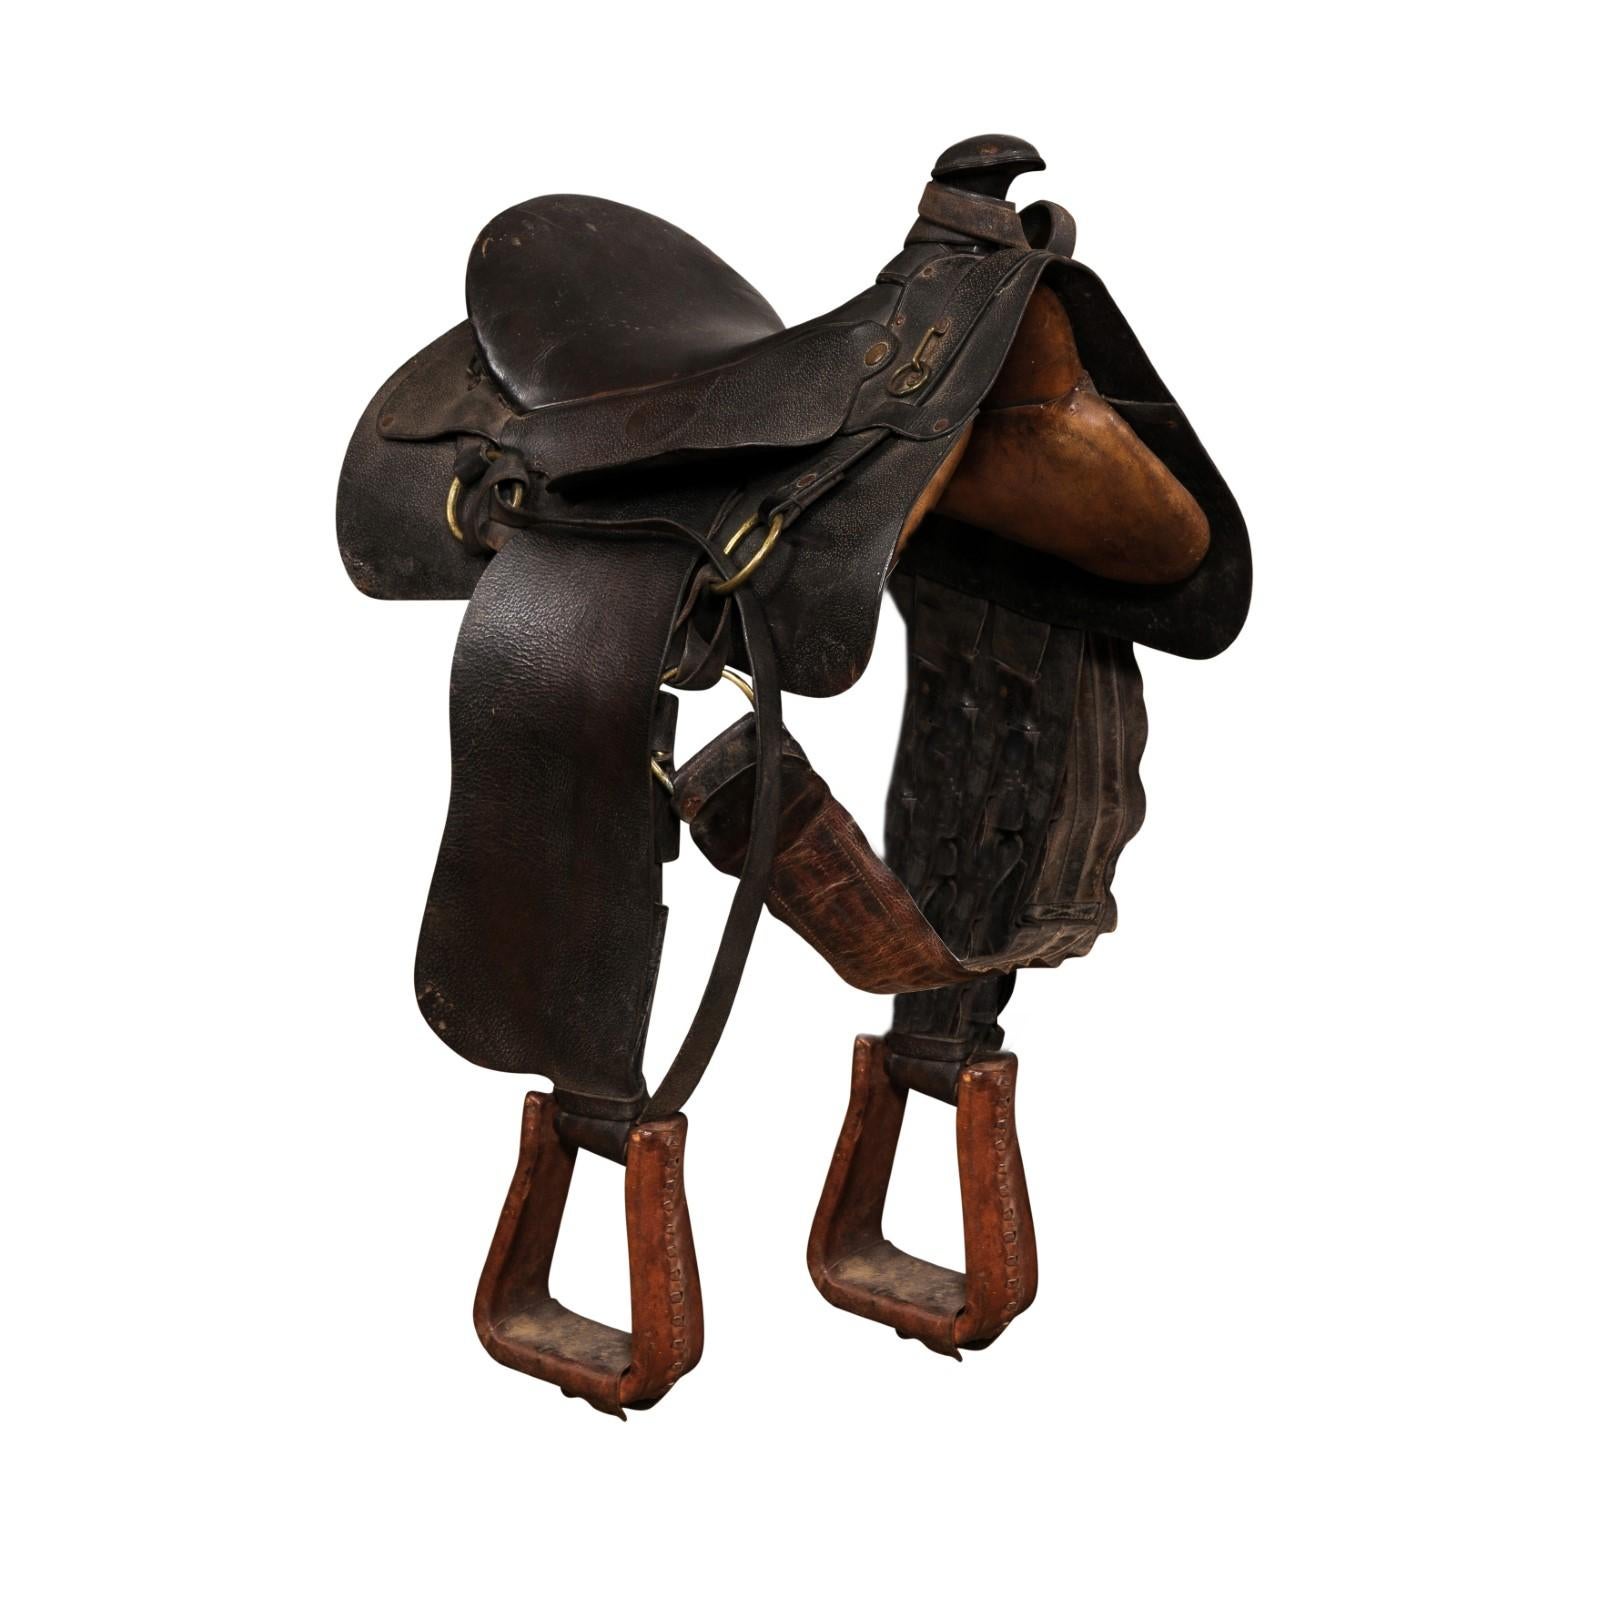 An American Western style leather saddle from the 20th century, with dark brown/black seat, jockey, fender, horn and lighter brown stirrups. Handcrafted in America during the 20th century, this leather Western style saddle boasts a nice patina